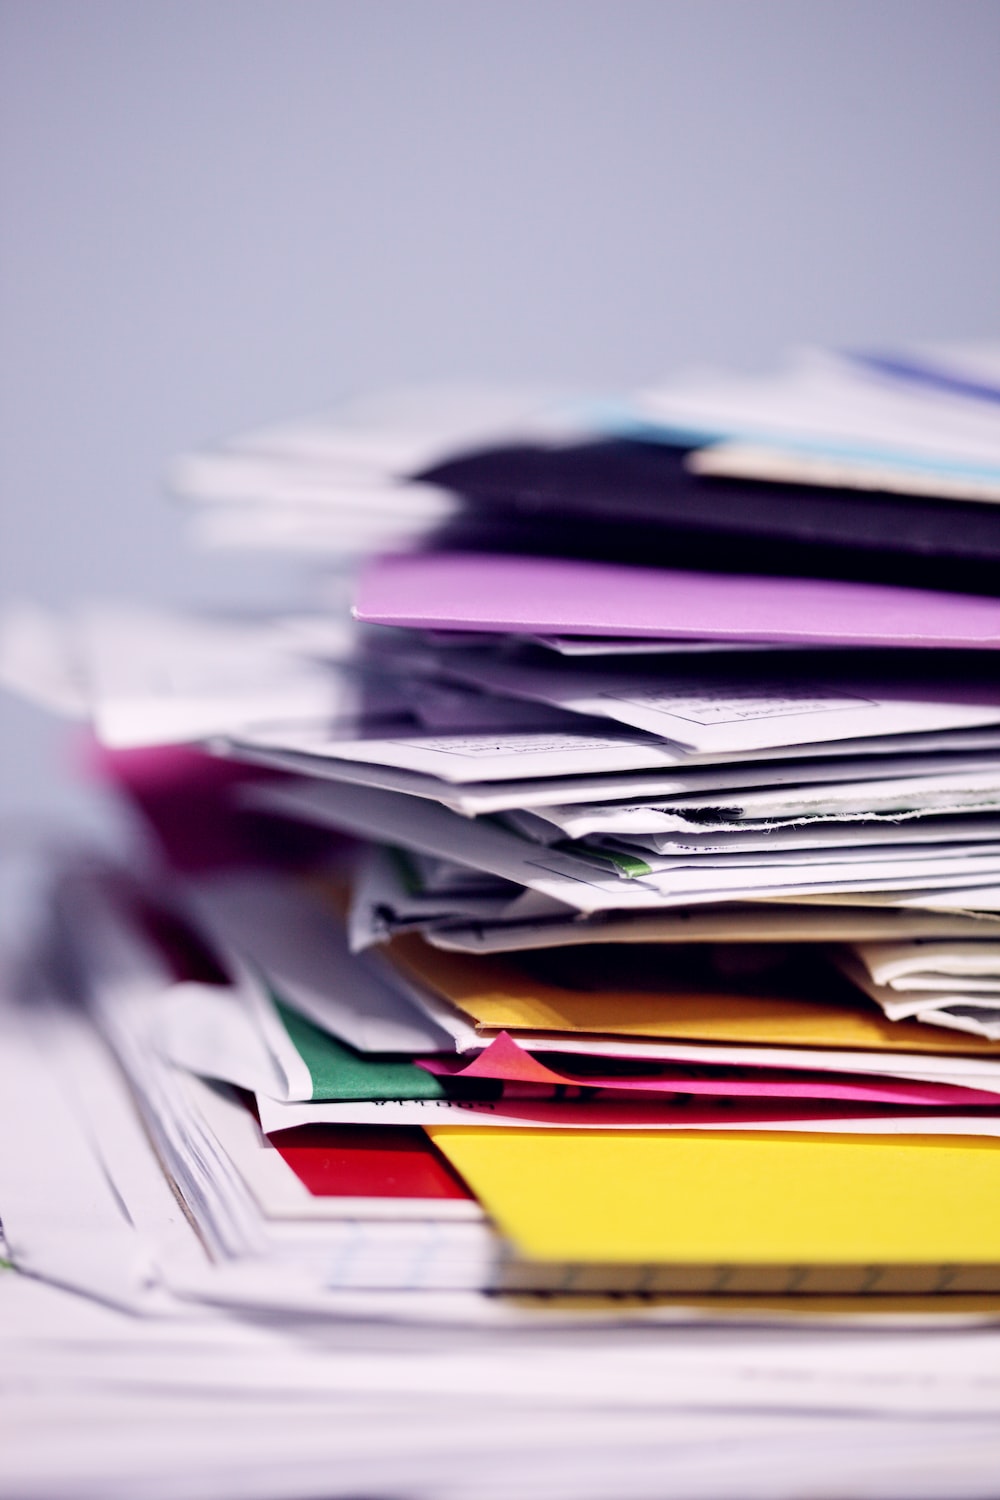 What are the three most commonly used filing systems?